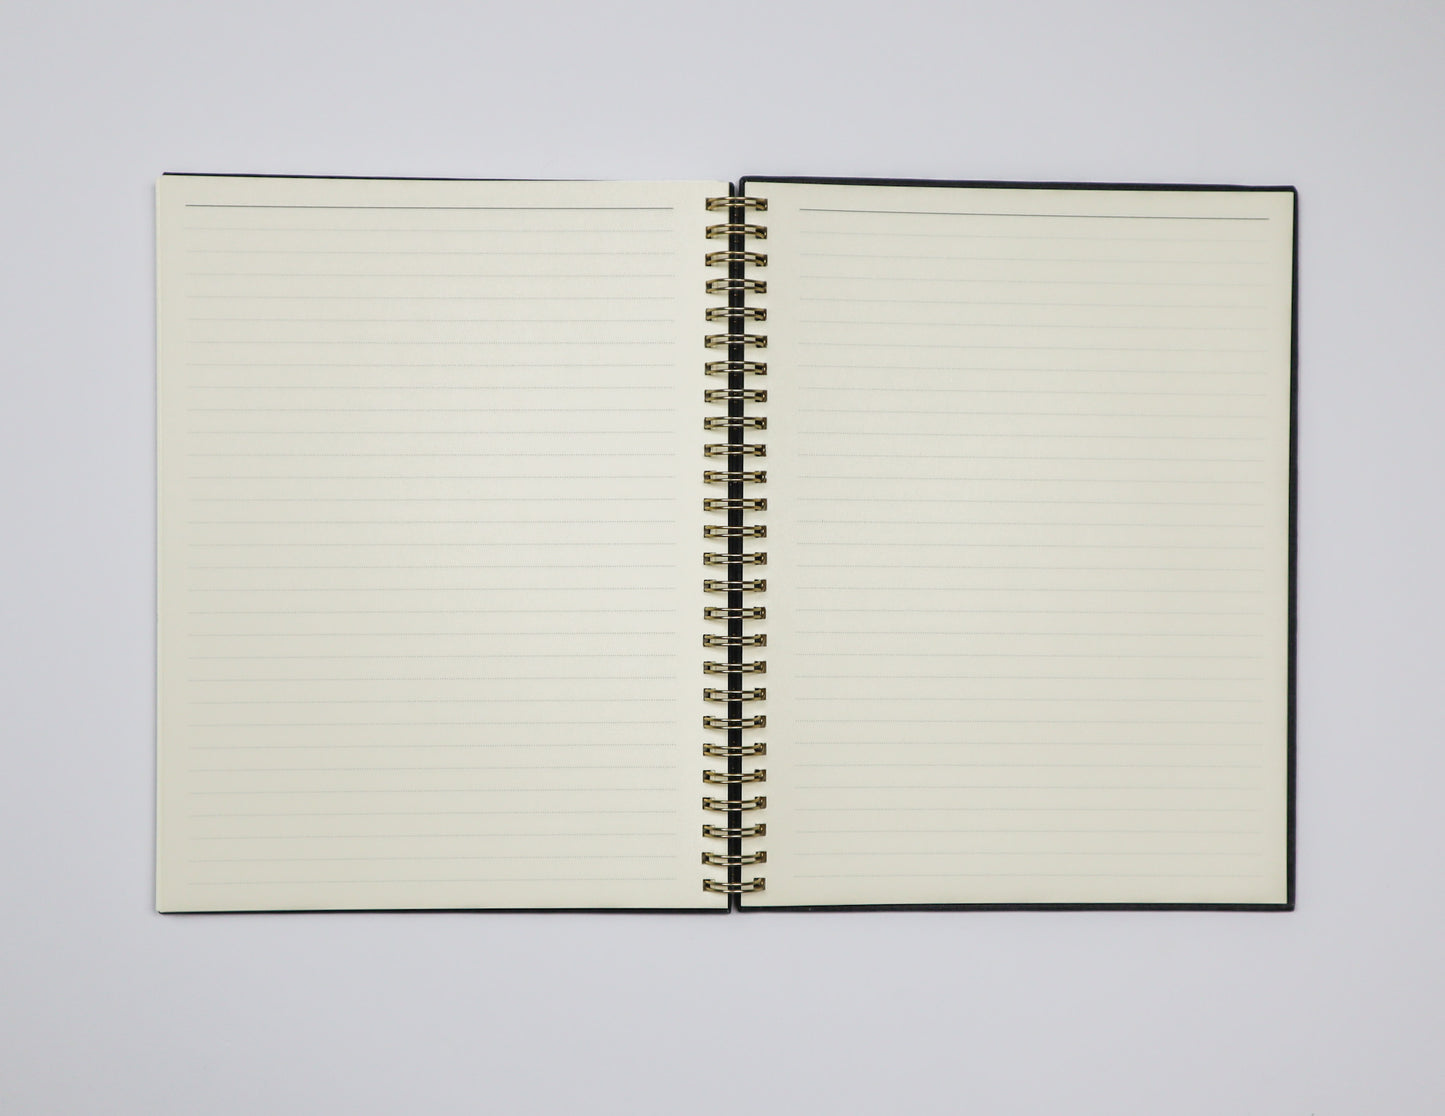 Undated Monthly Planner in Charcoal